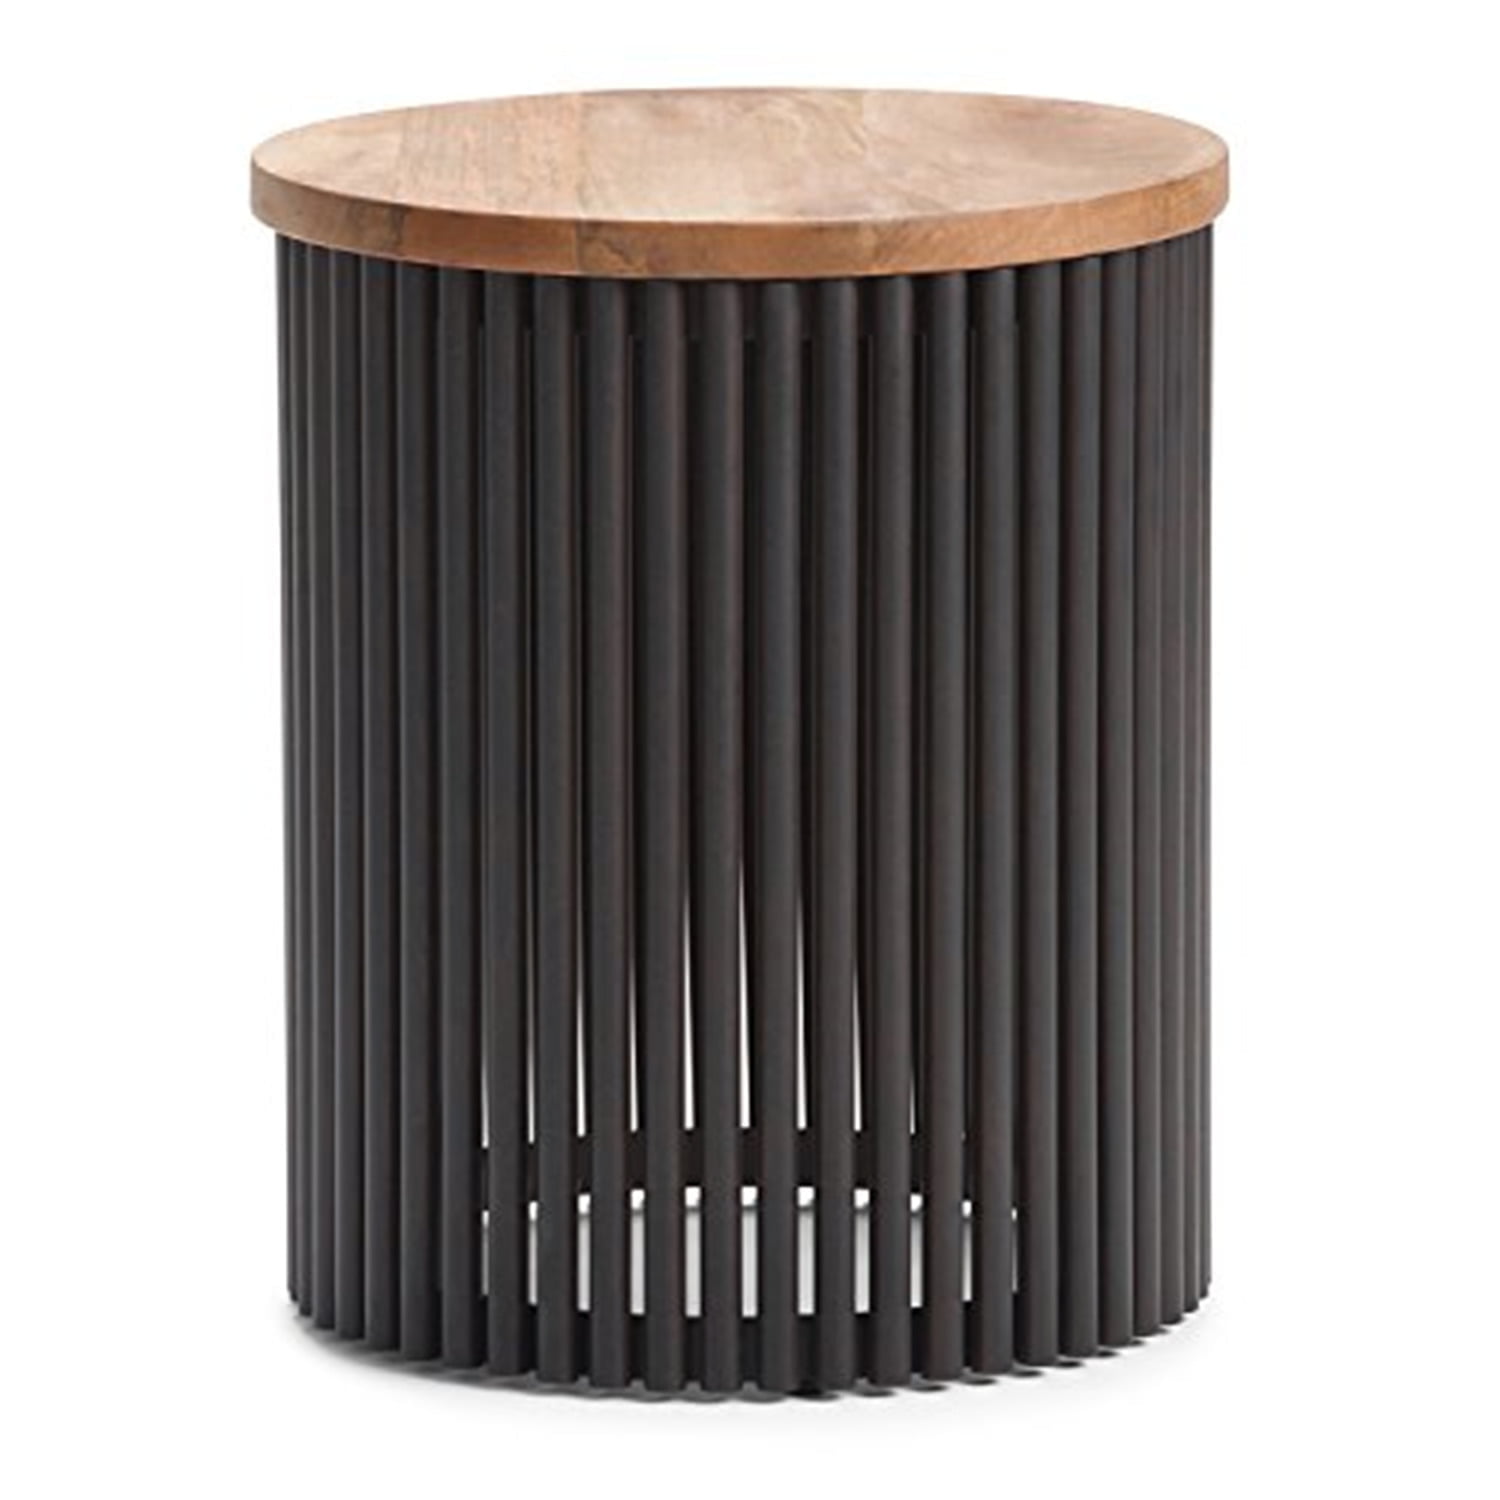 Simpli Home Demy Contemporary 18 inch Wide Metal and Wood Accent Side Table  in Natural, Black, Fully Assembled-Color:Natural and Black,Material:Metal ,Style:Contemporary